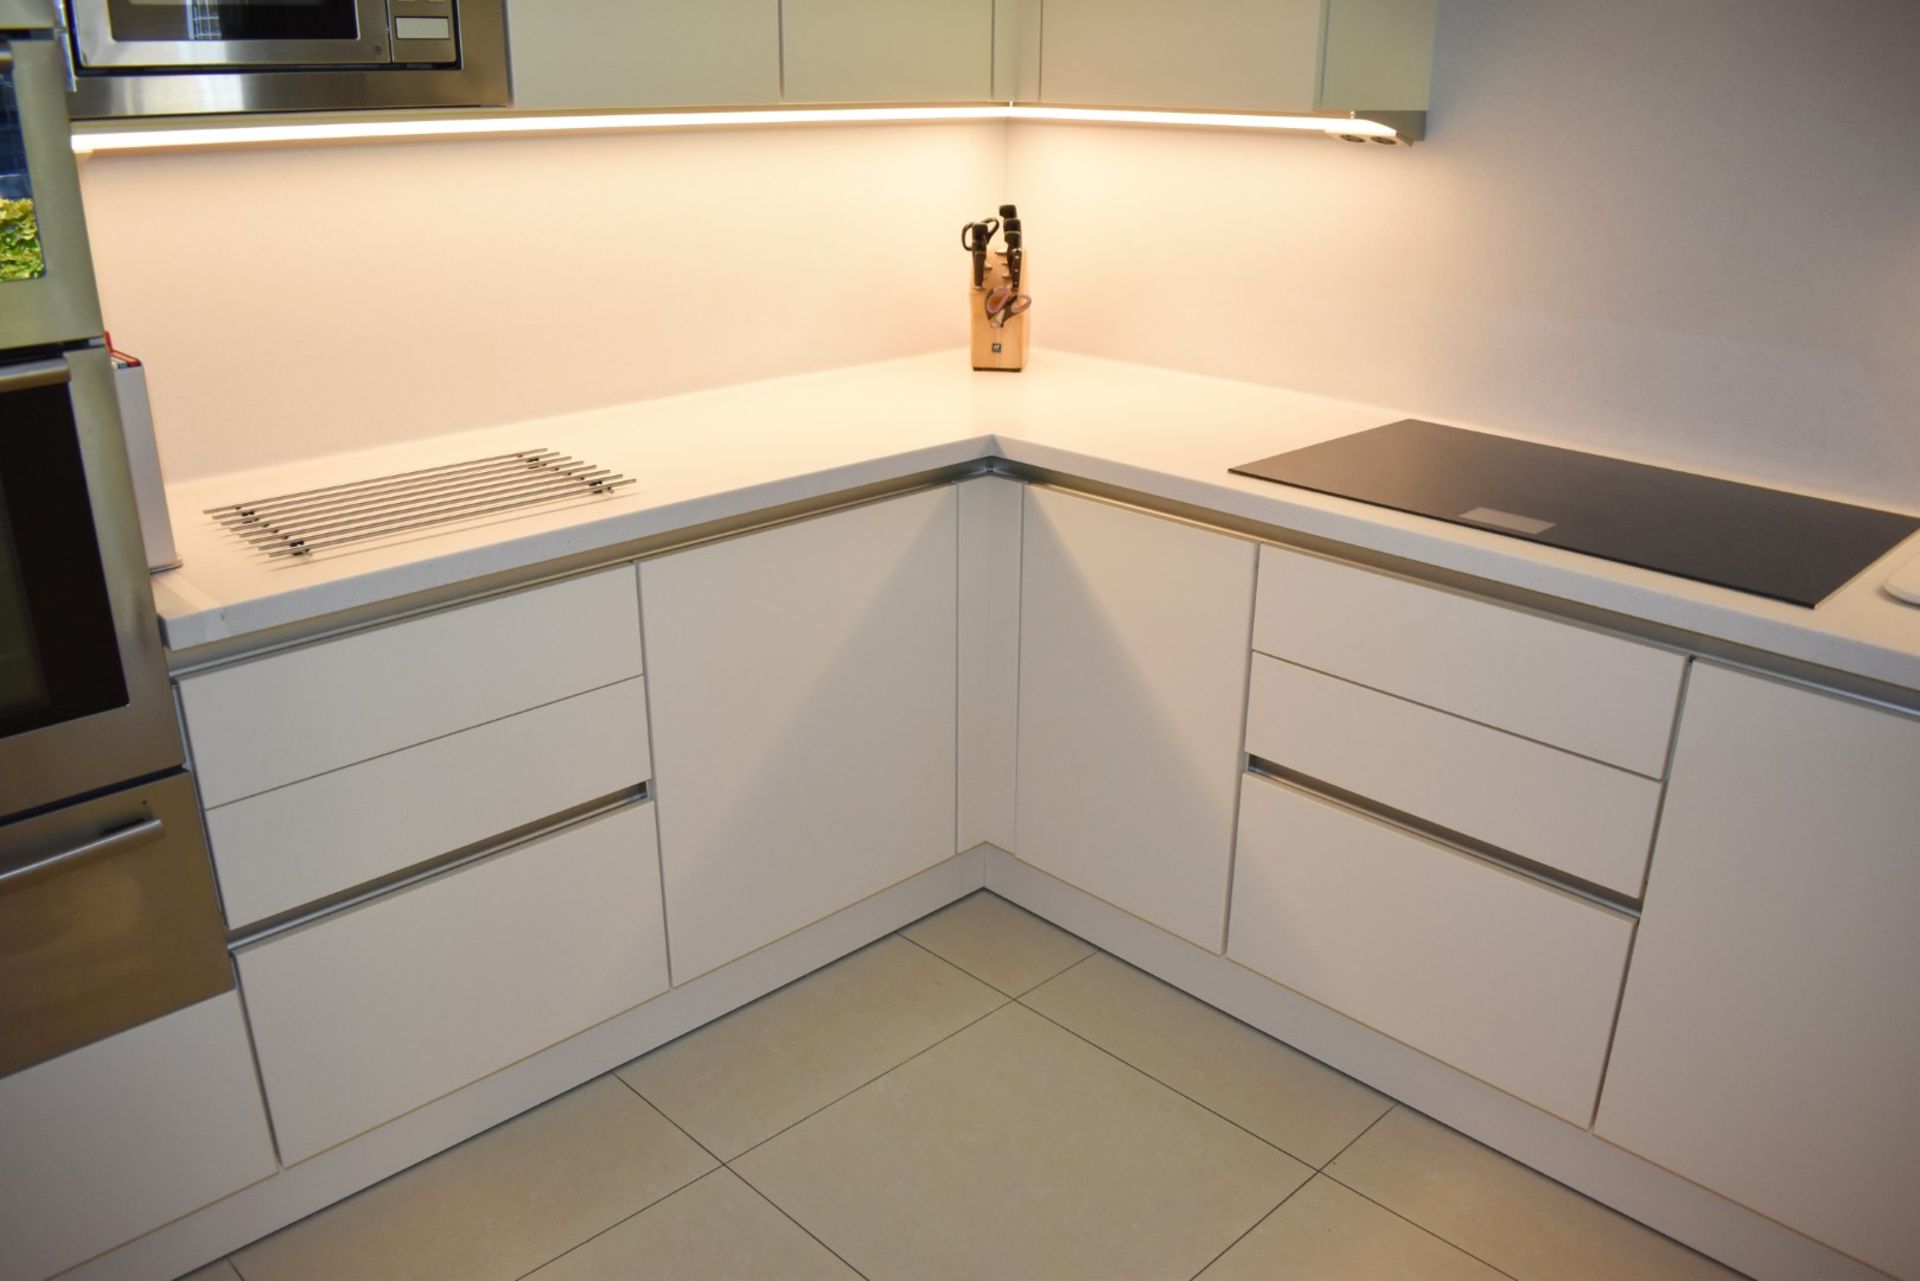 1 x Contemporary SieMatic Fitted Kitchen With Corian Work Surfaces and Integrated Appliances - Image 10 of 70